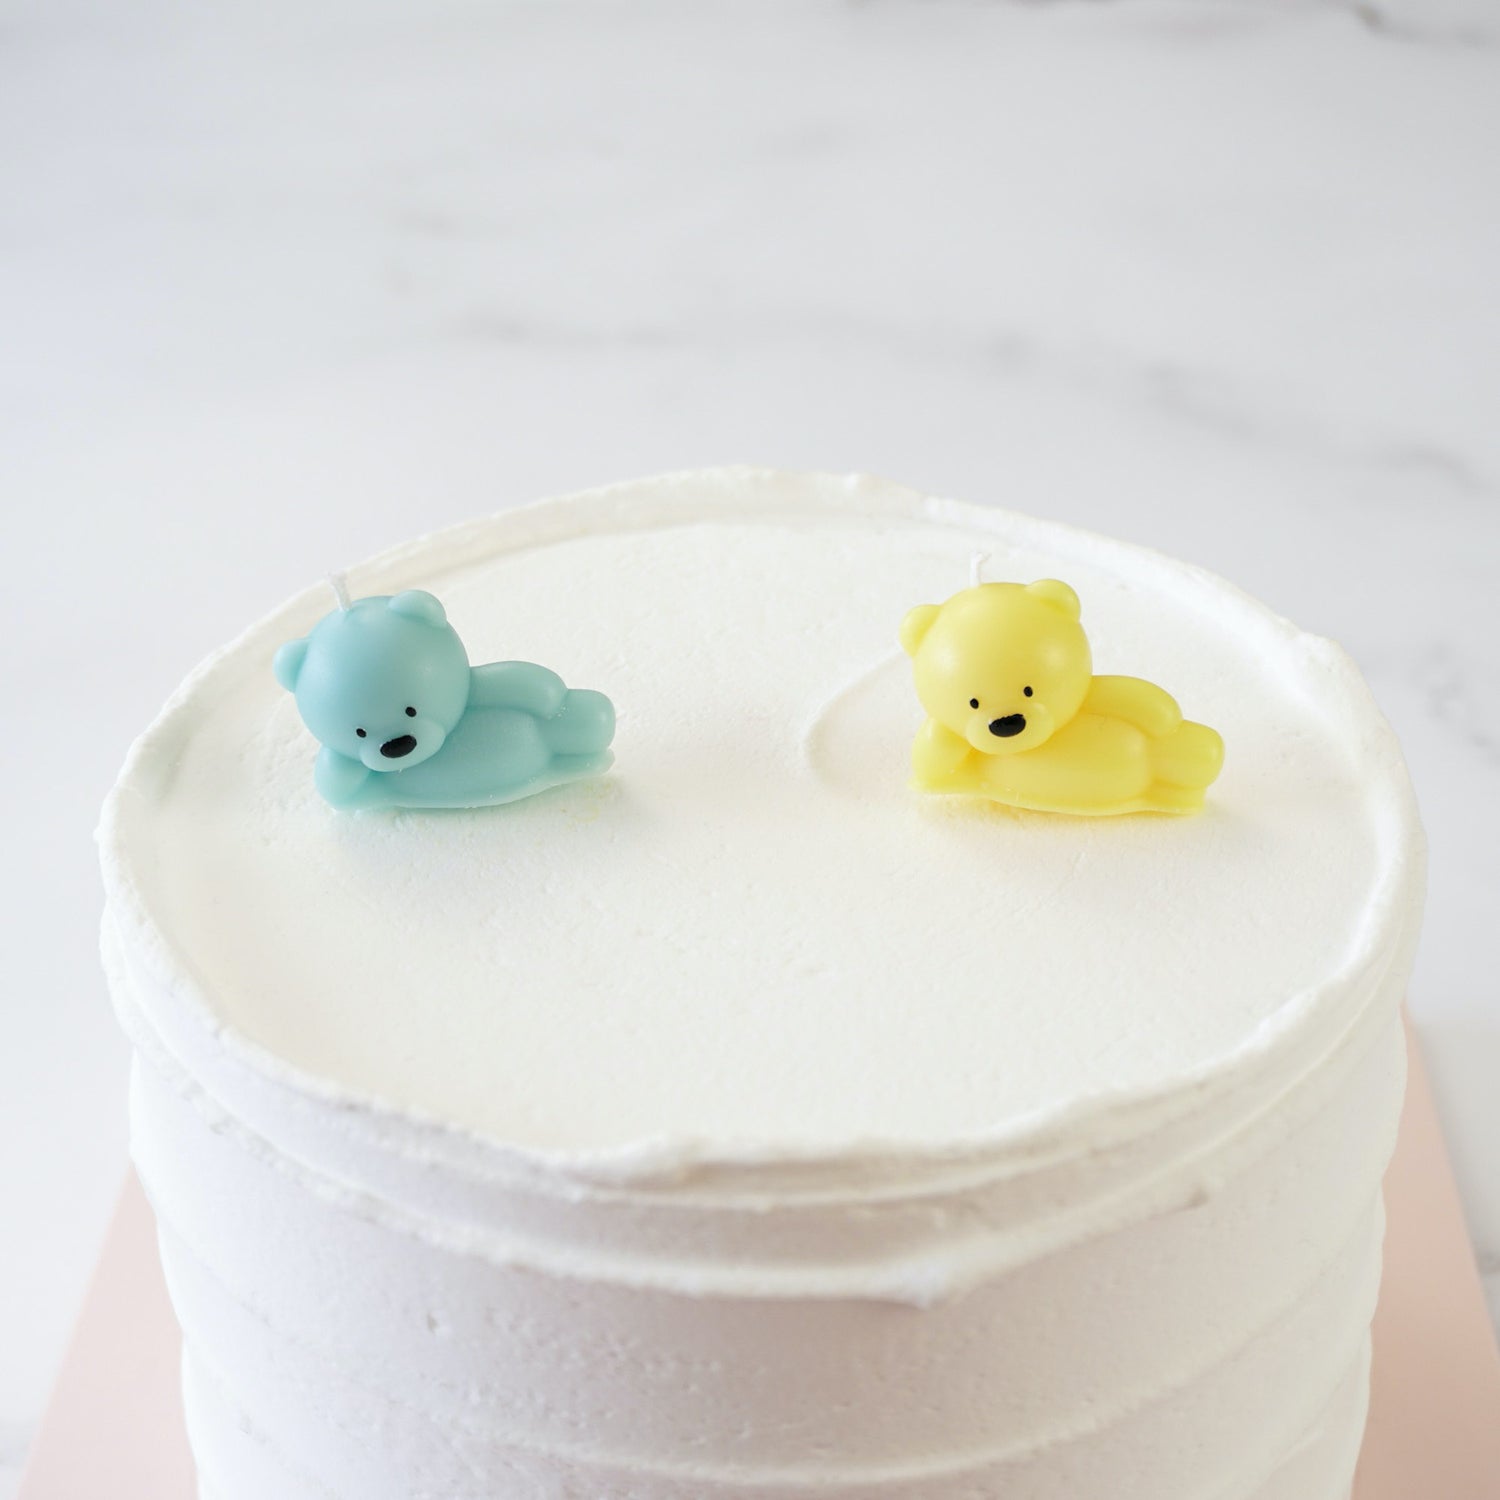 birthday cake candles in mint and yellow